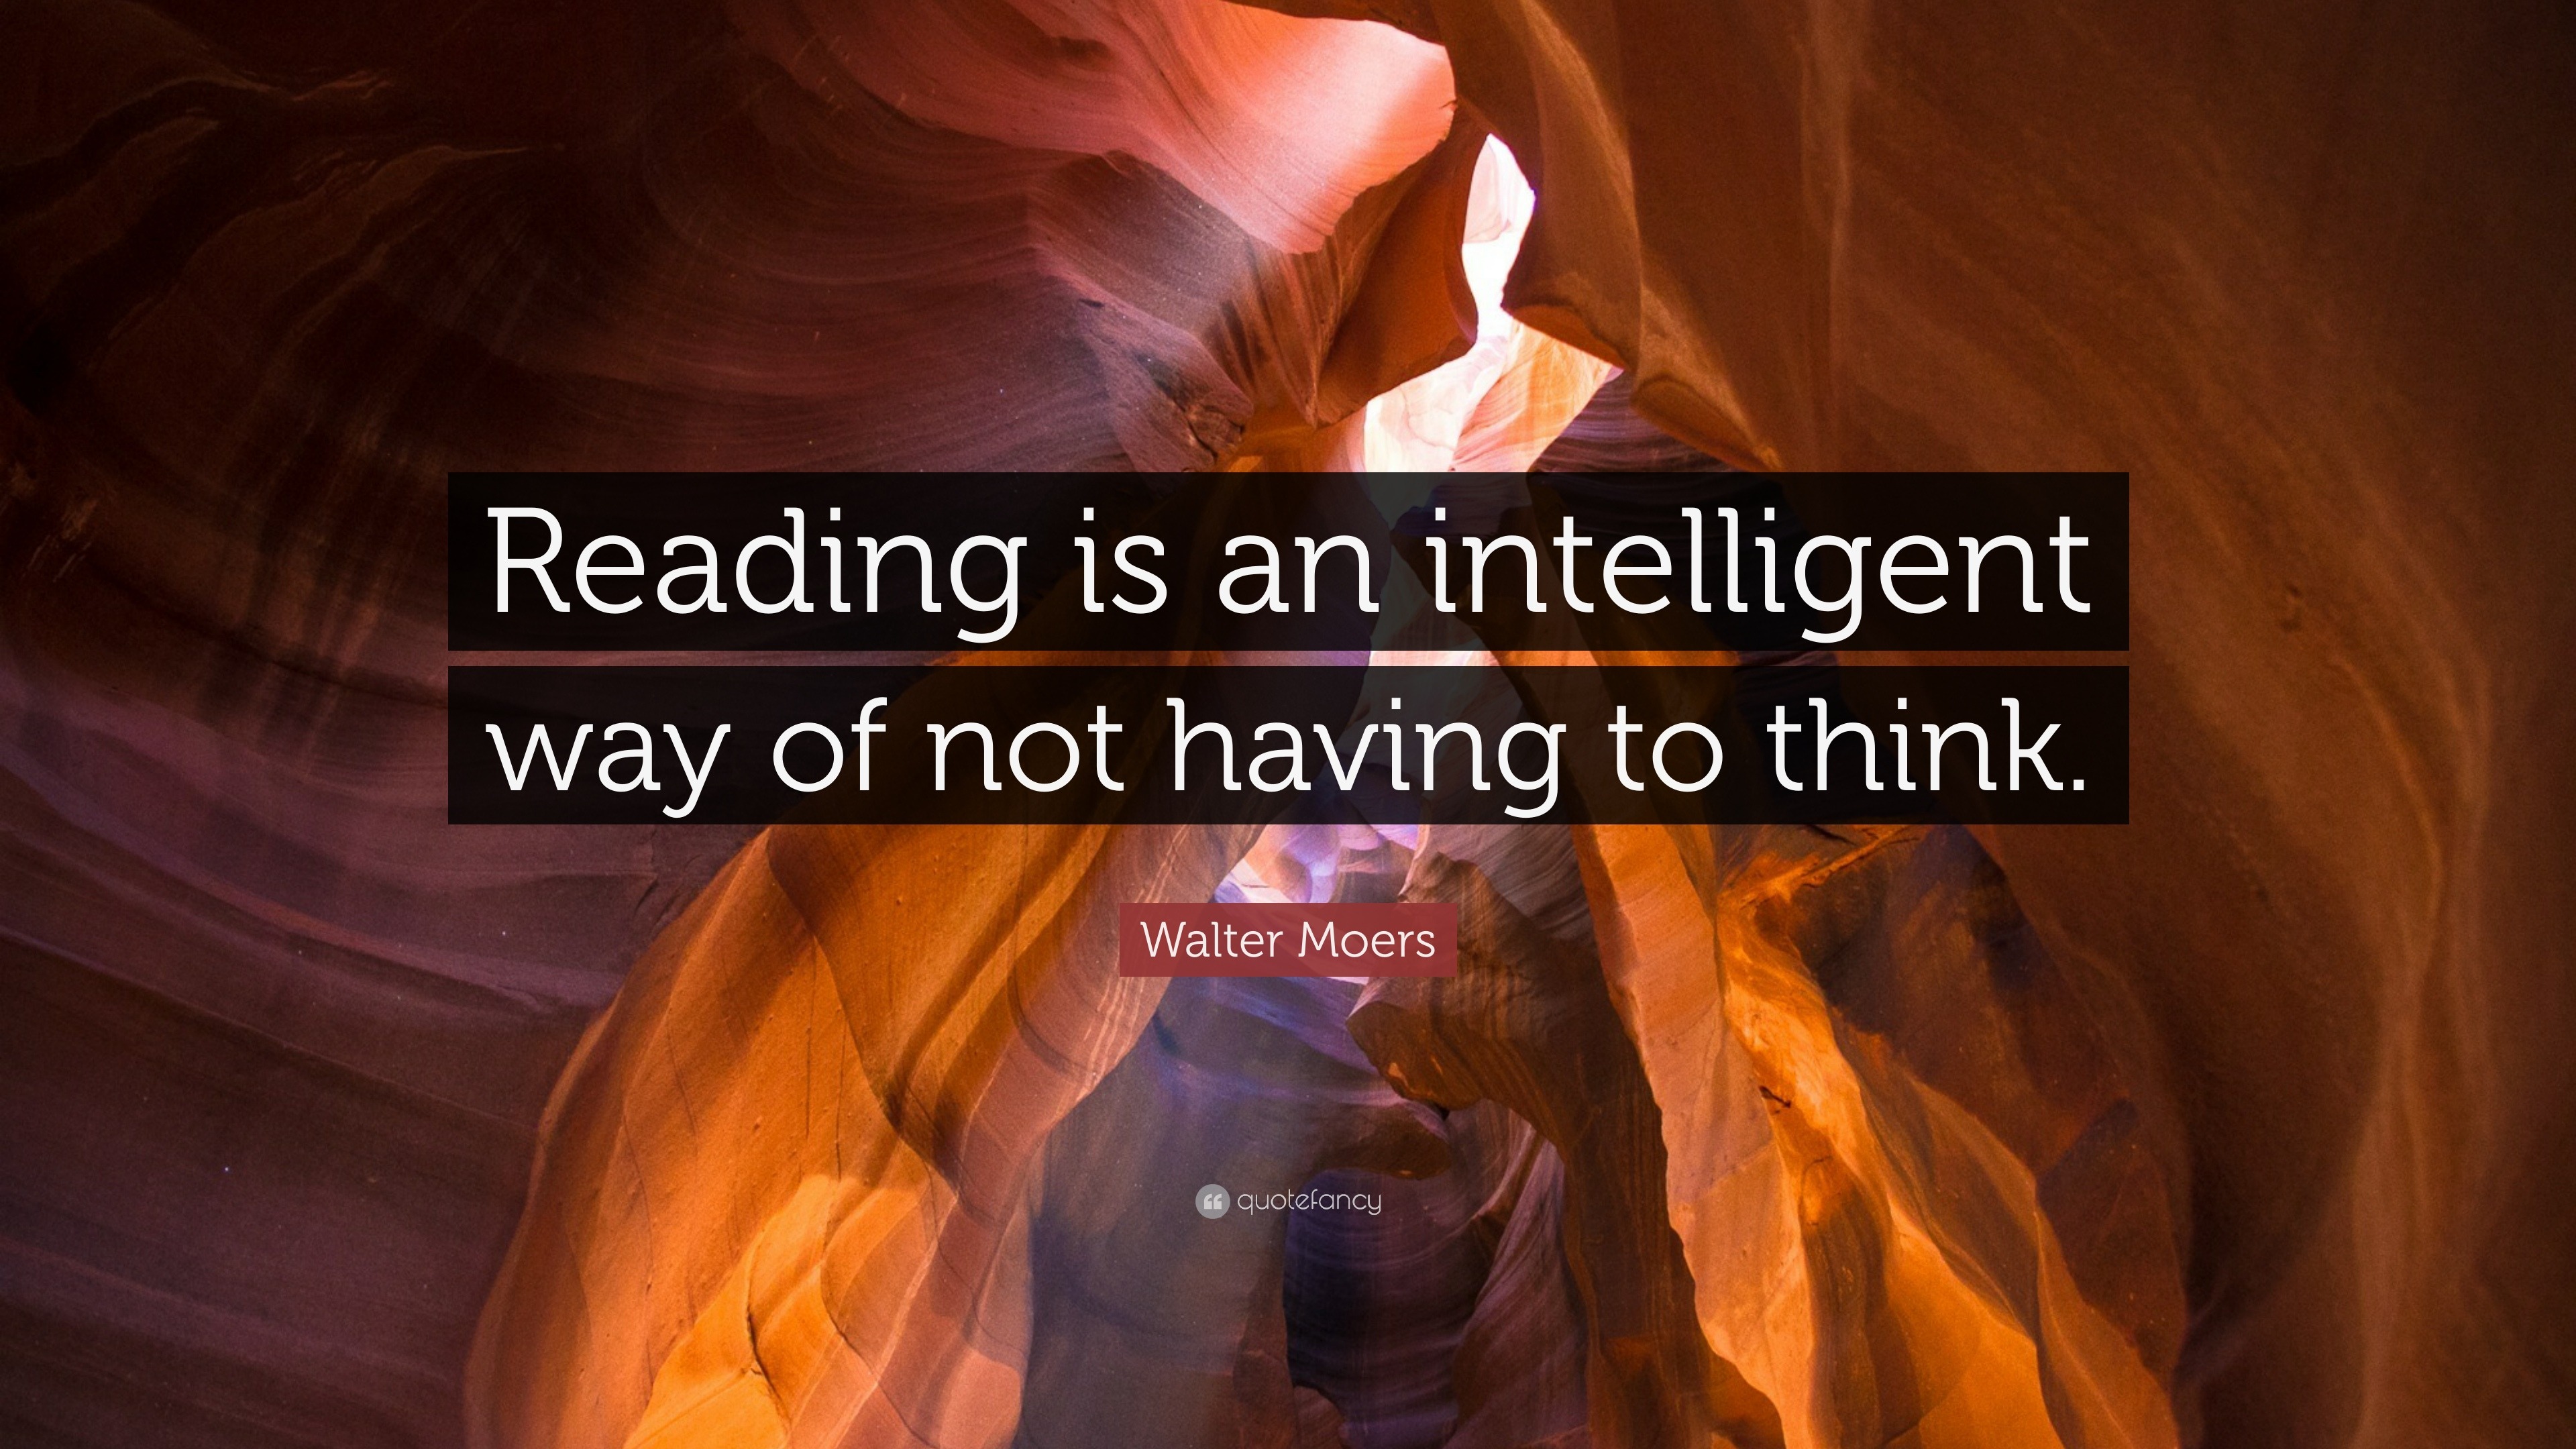 Walter Moers Quote: “Reading is an intelligent way of not having to think.”